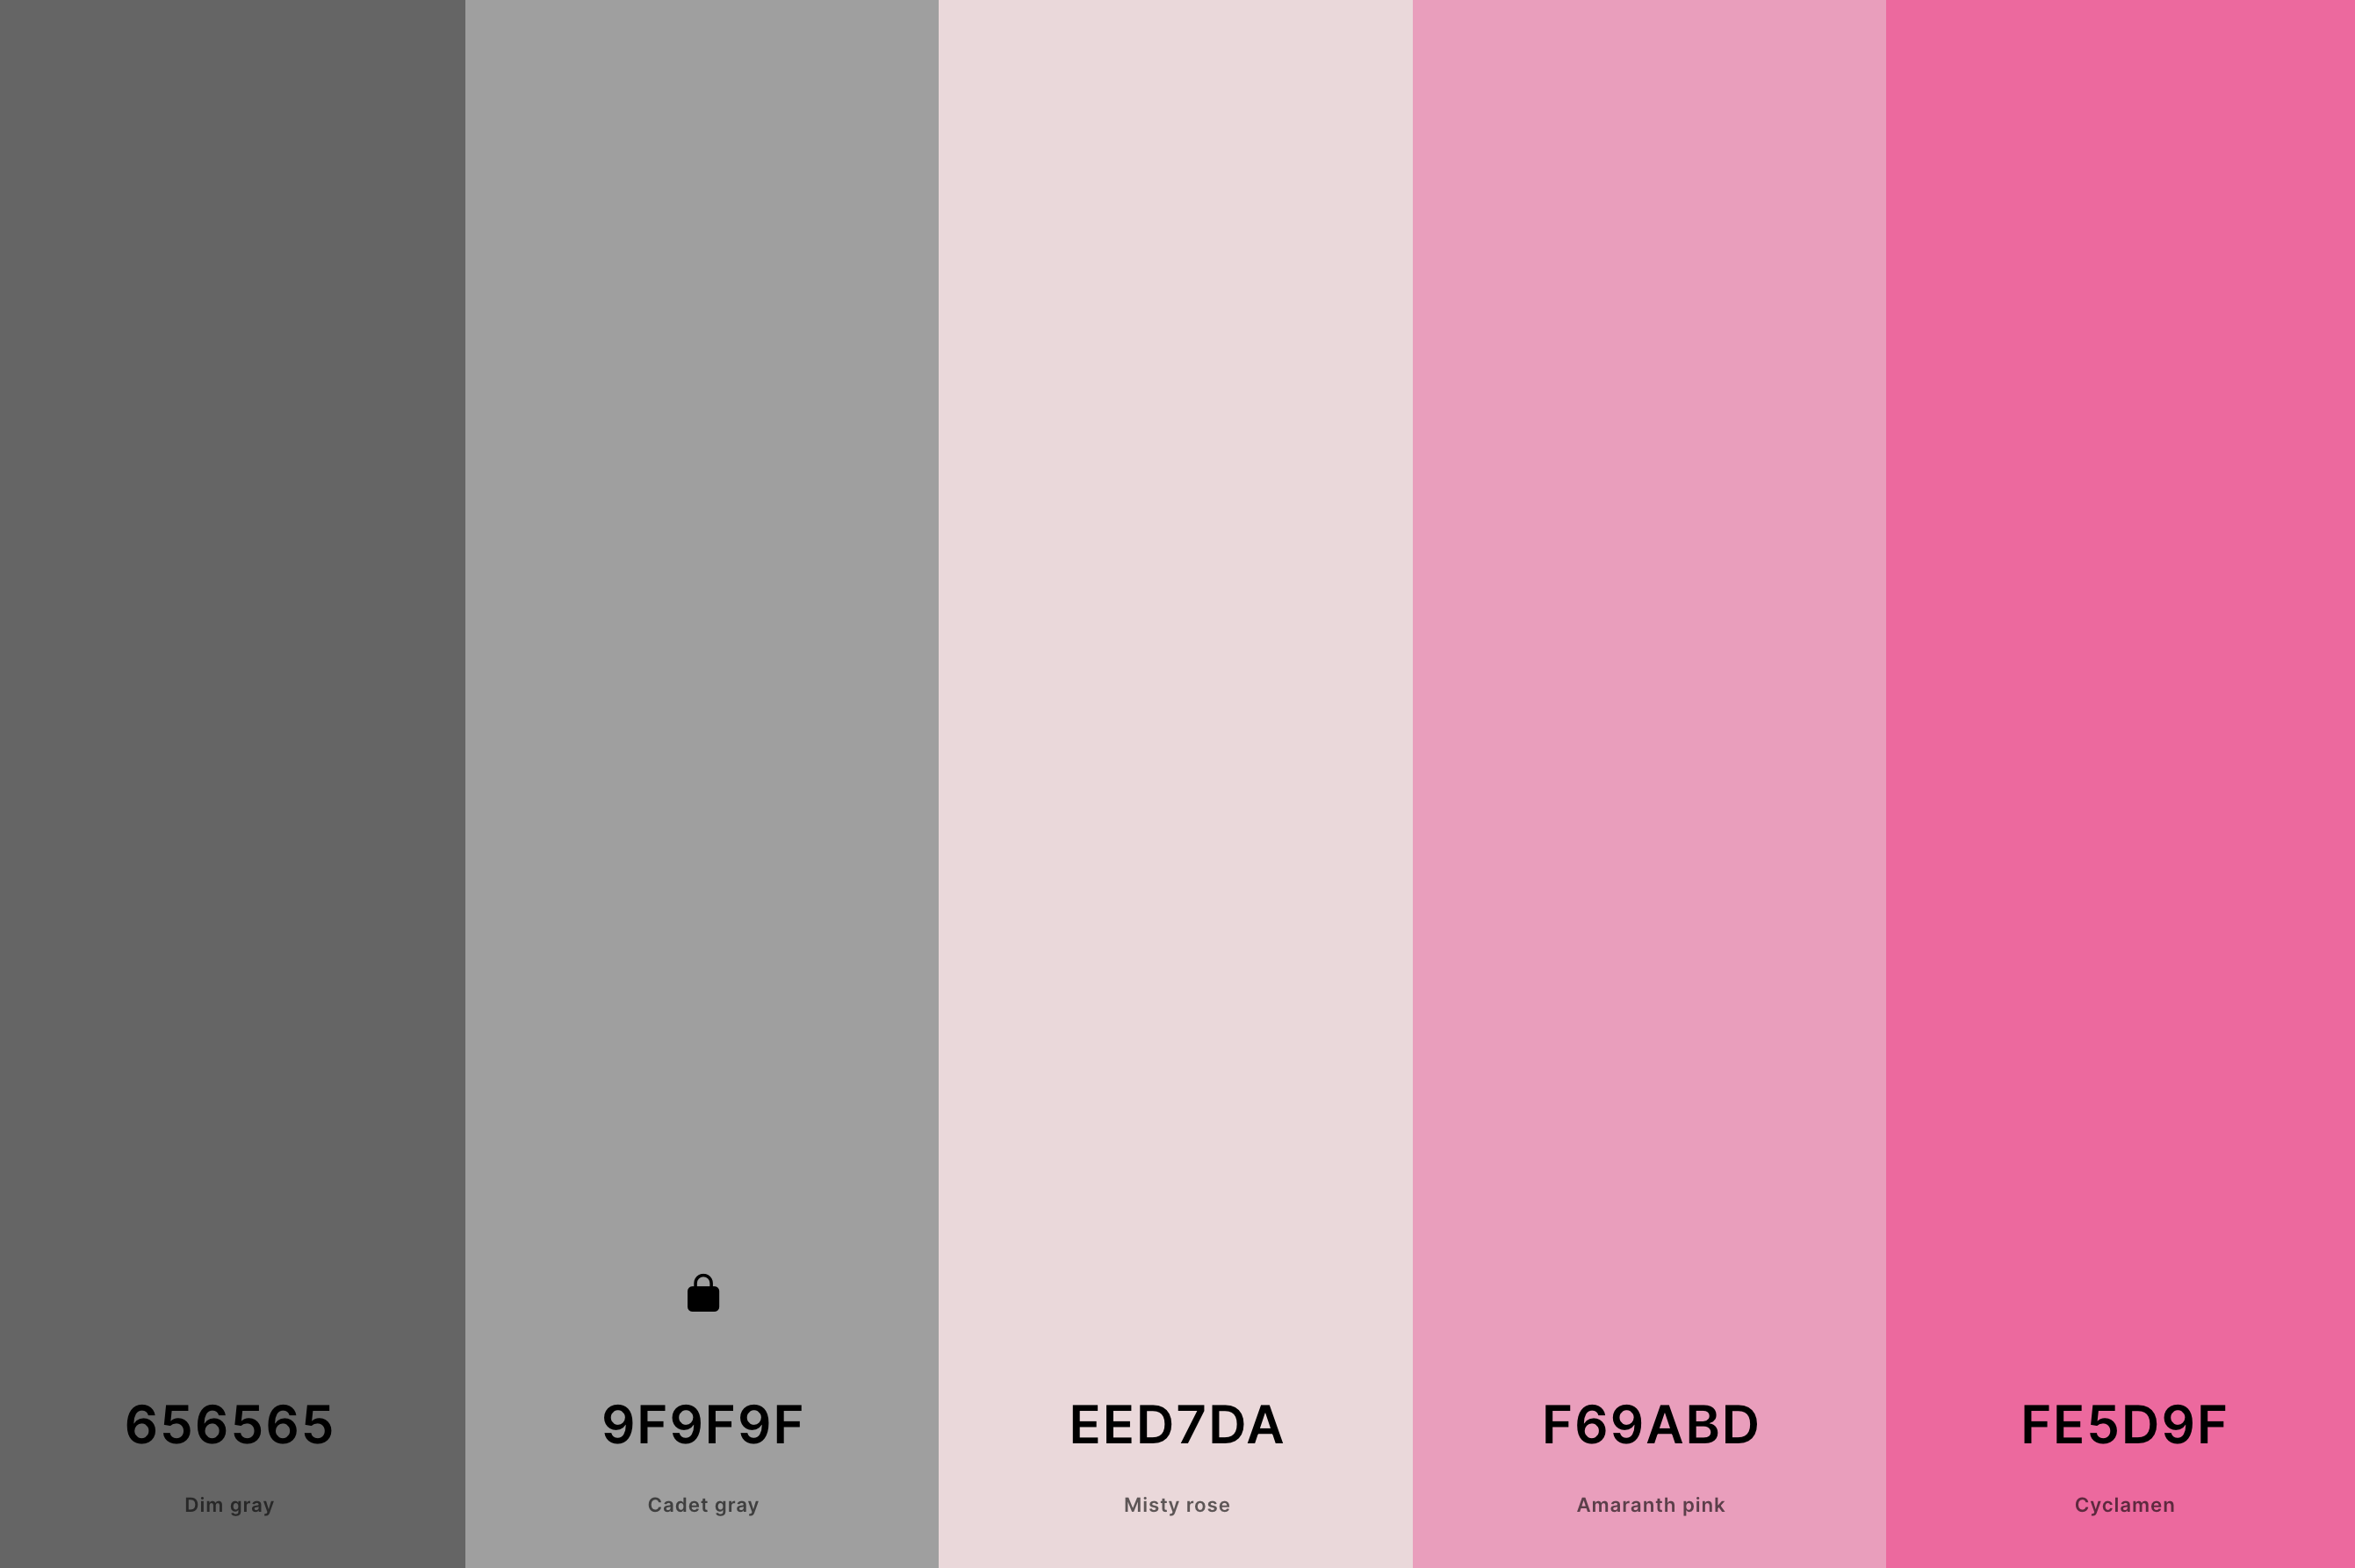 18. Pink And Gray Color Palette Color Palette with Dim Gray (Hex #656565) + Cadet Gray (Hex #9F9F9F) + Misty Rose (Hex #EED7DA) + Amaranth Pink (Hex #F69ABD) + Cyclamen (Hex #FE5D9F) Color Palette with Hex Codes